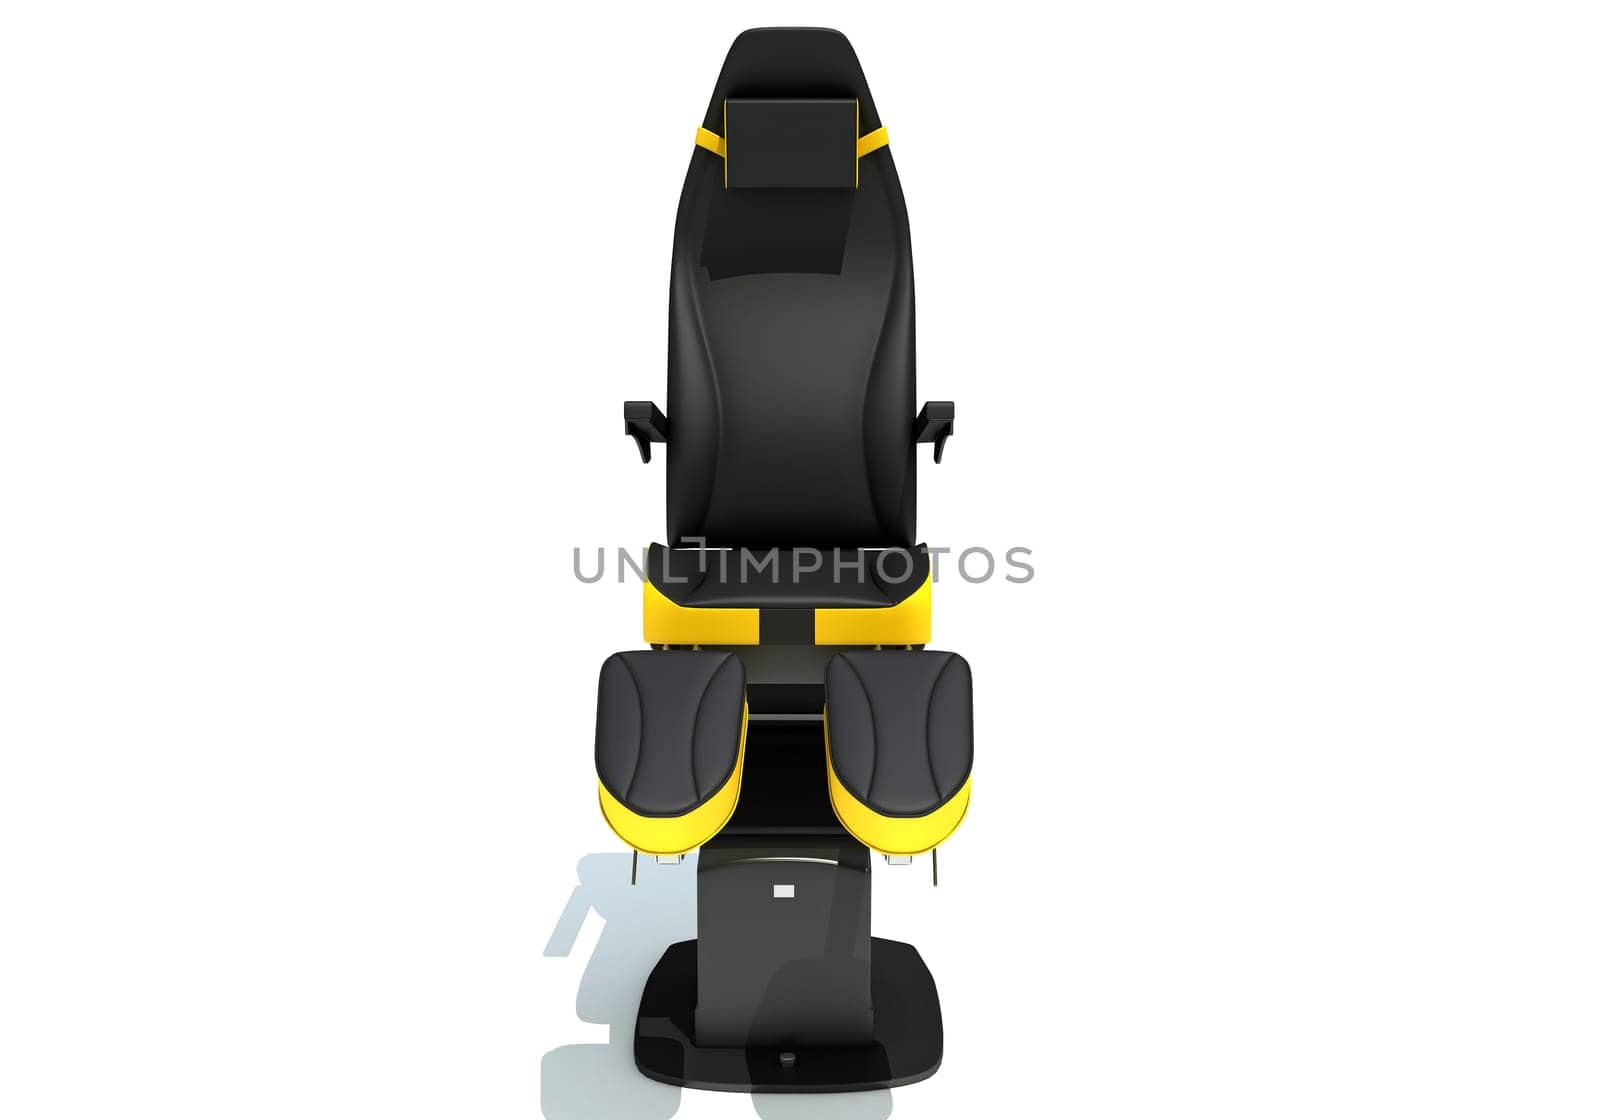 Medical Examination Chair medical equipment 3D rendering on white background by 3DHorse